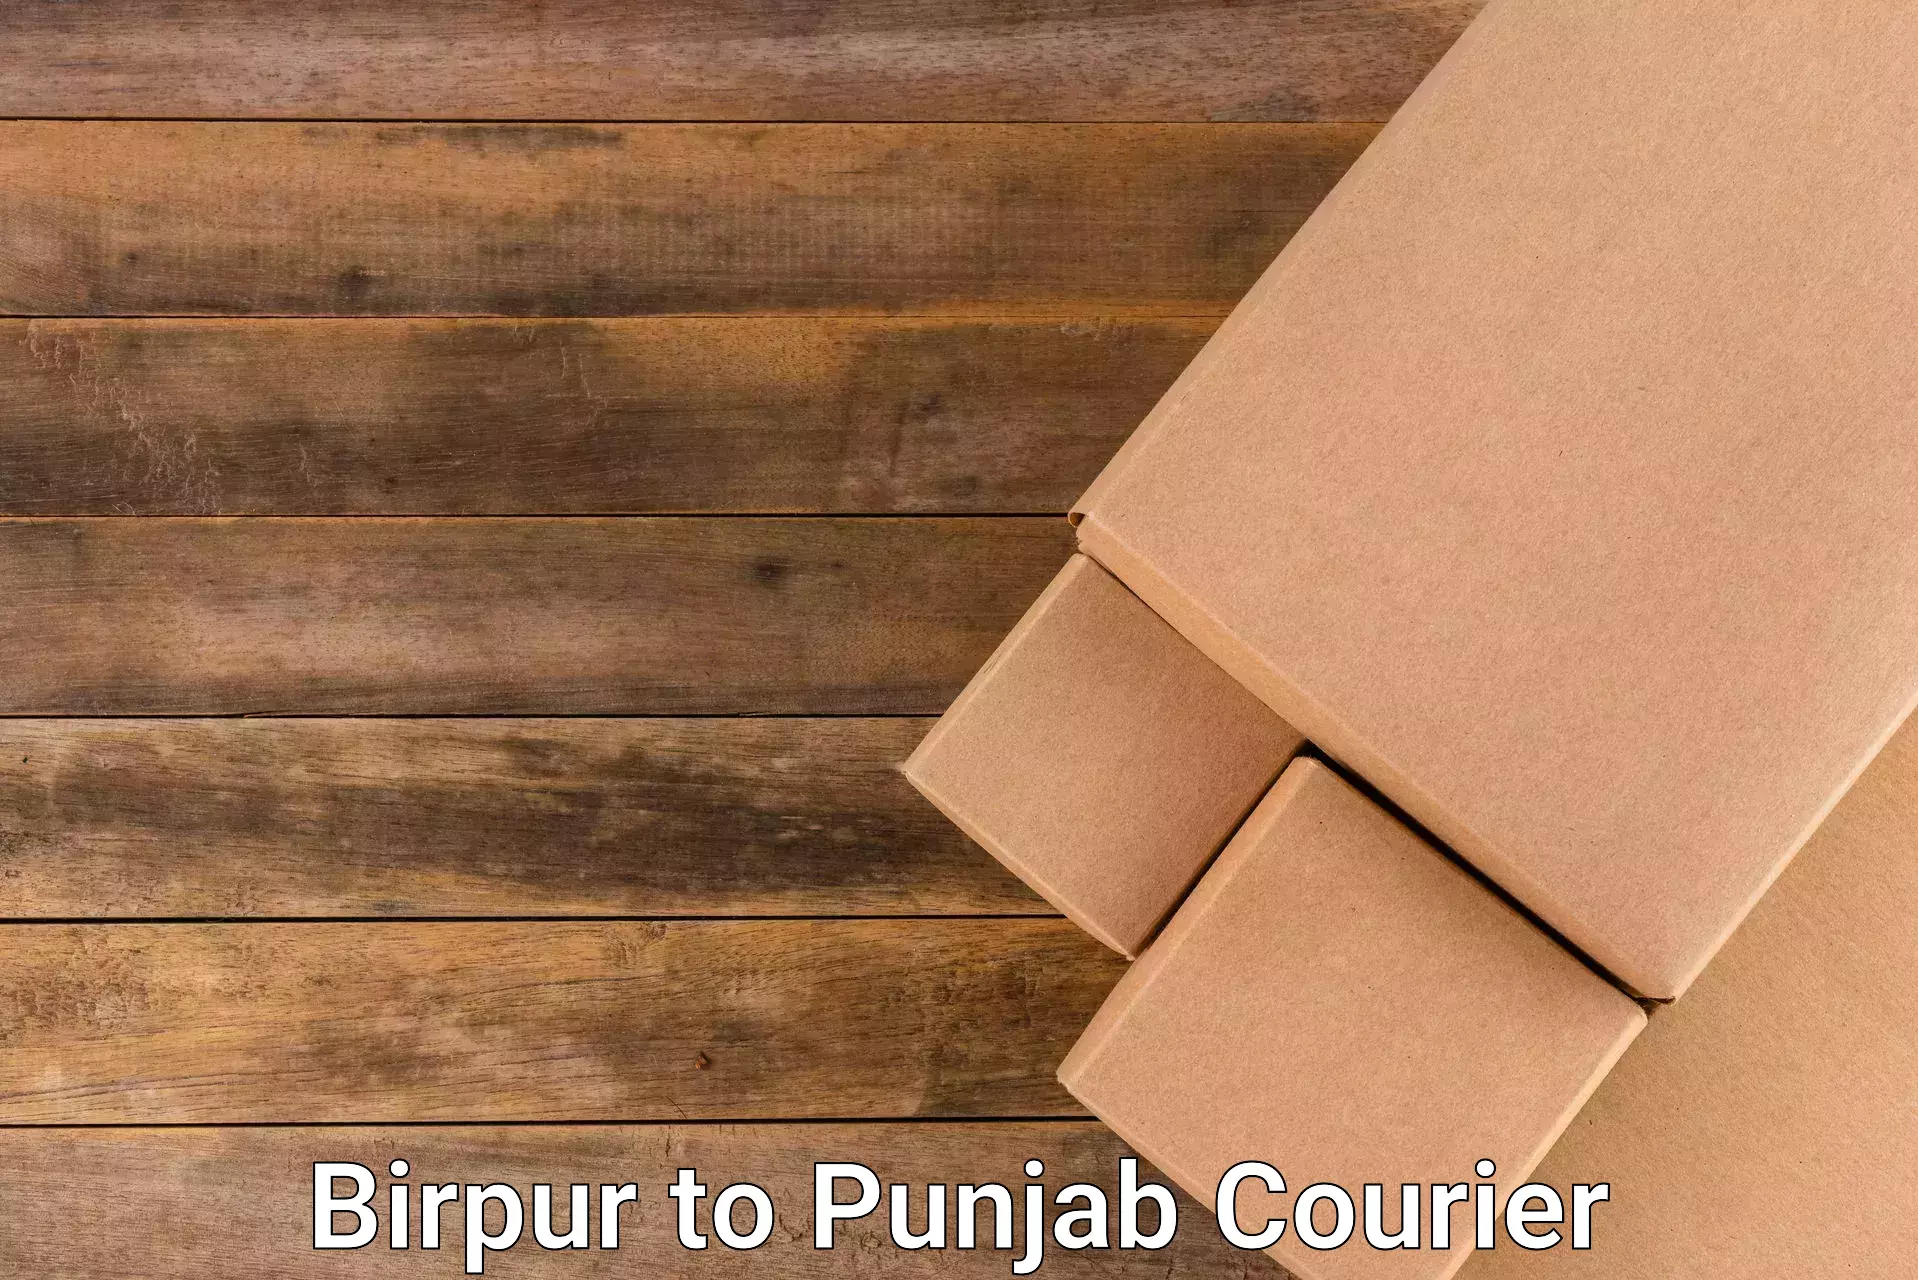 Automated shipping in Birpur to Ajnala